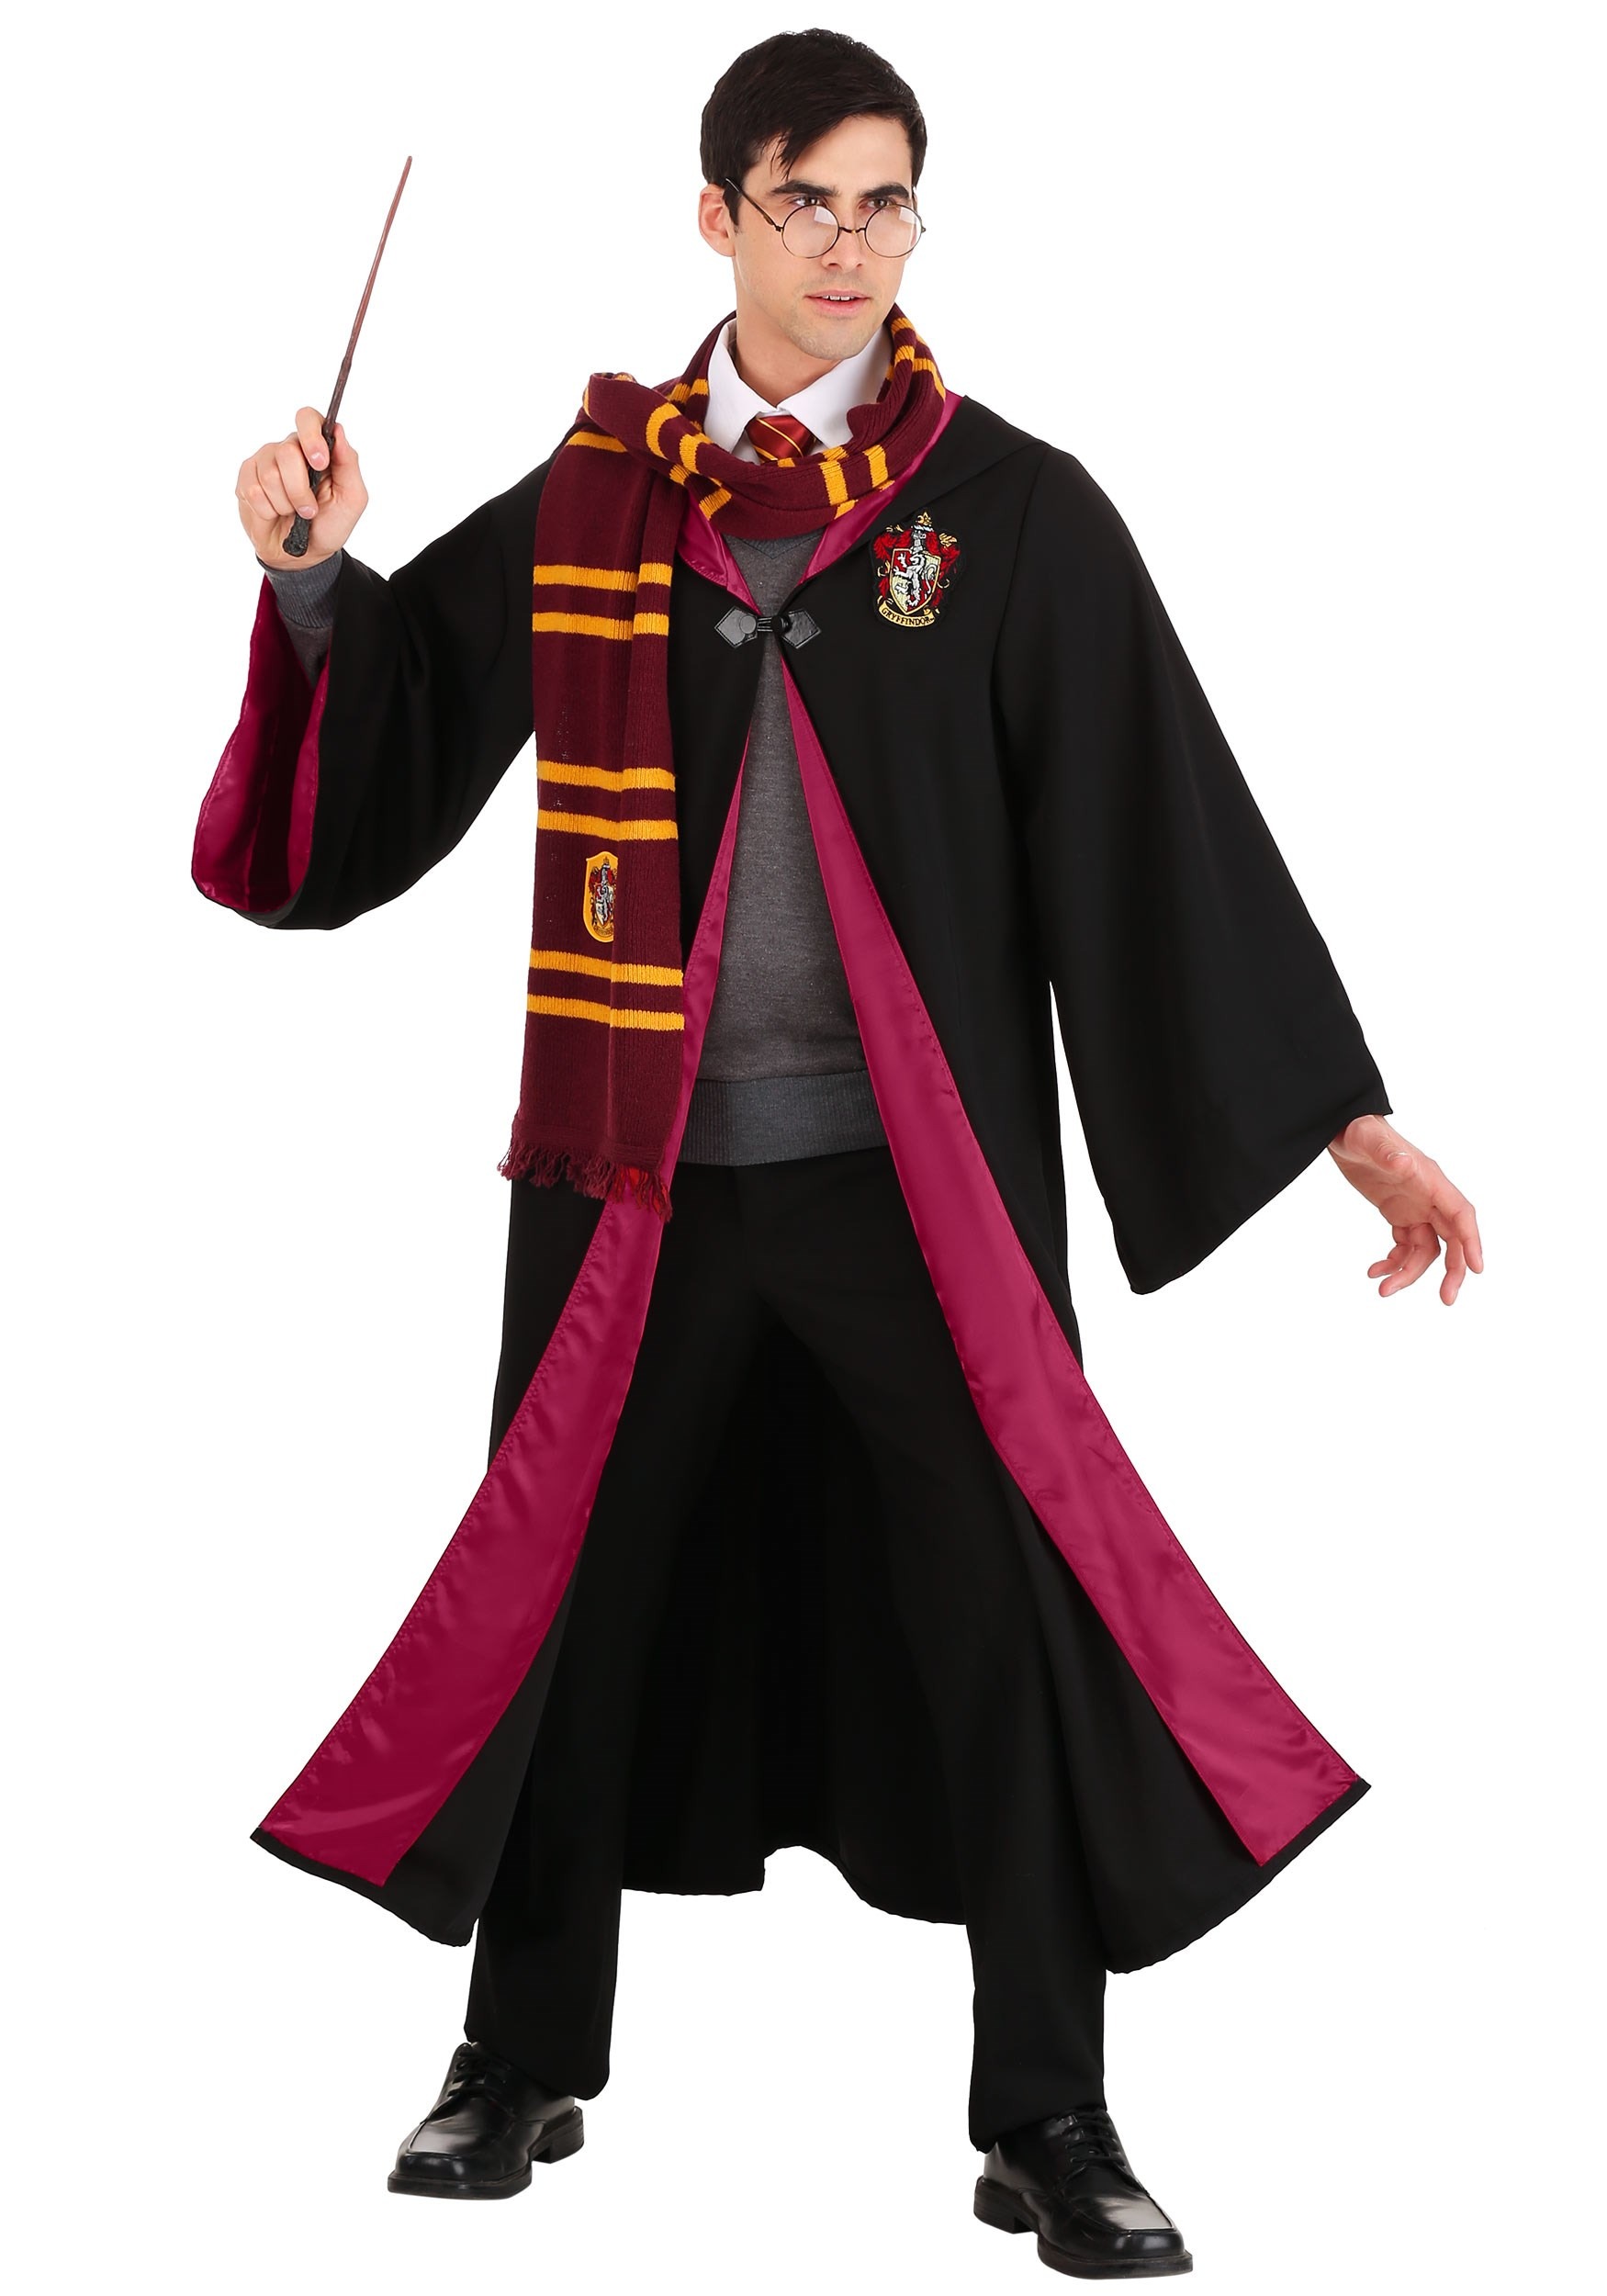 https://images.halloween.com/products/64162/1-1/deluxe-harry-potter-adults-costume.jpg